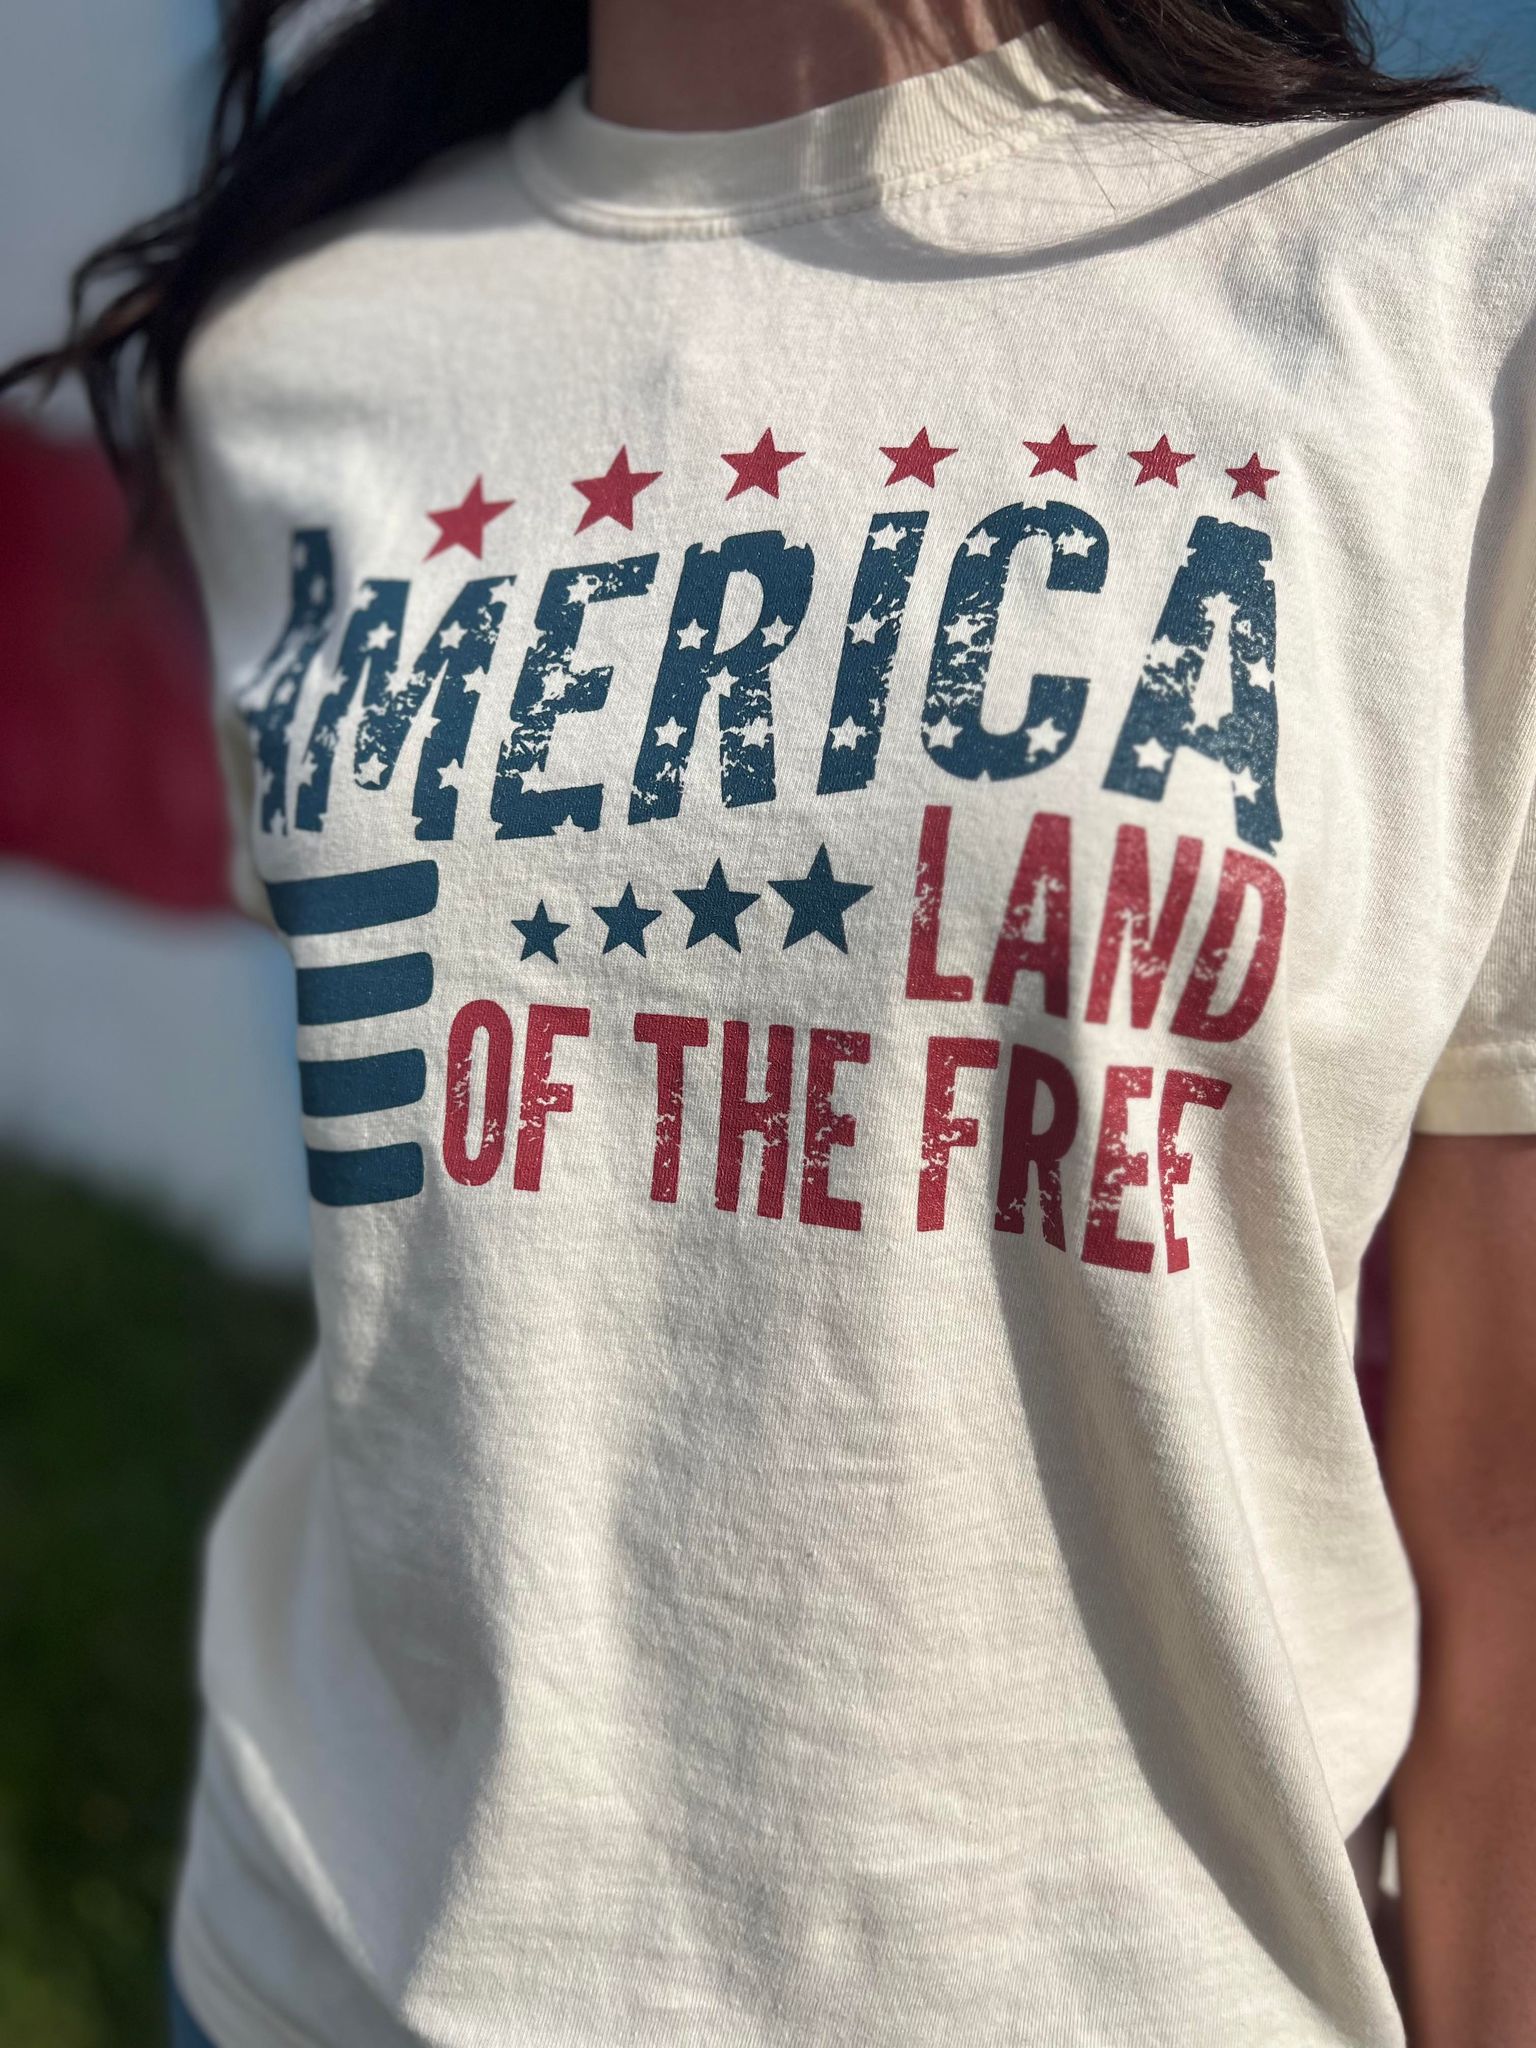 America Land of the Free Tee- ASK Apparel LLC